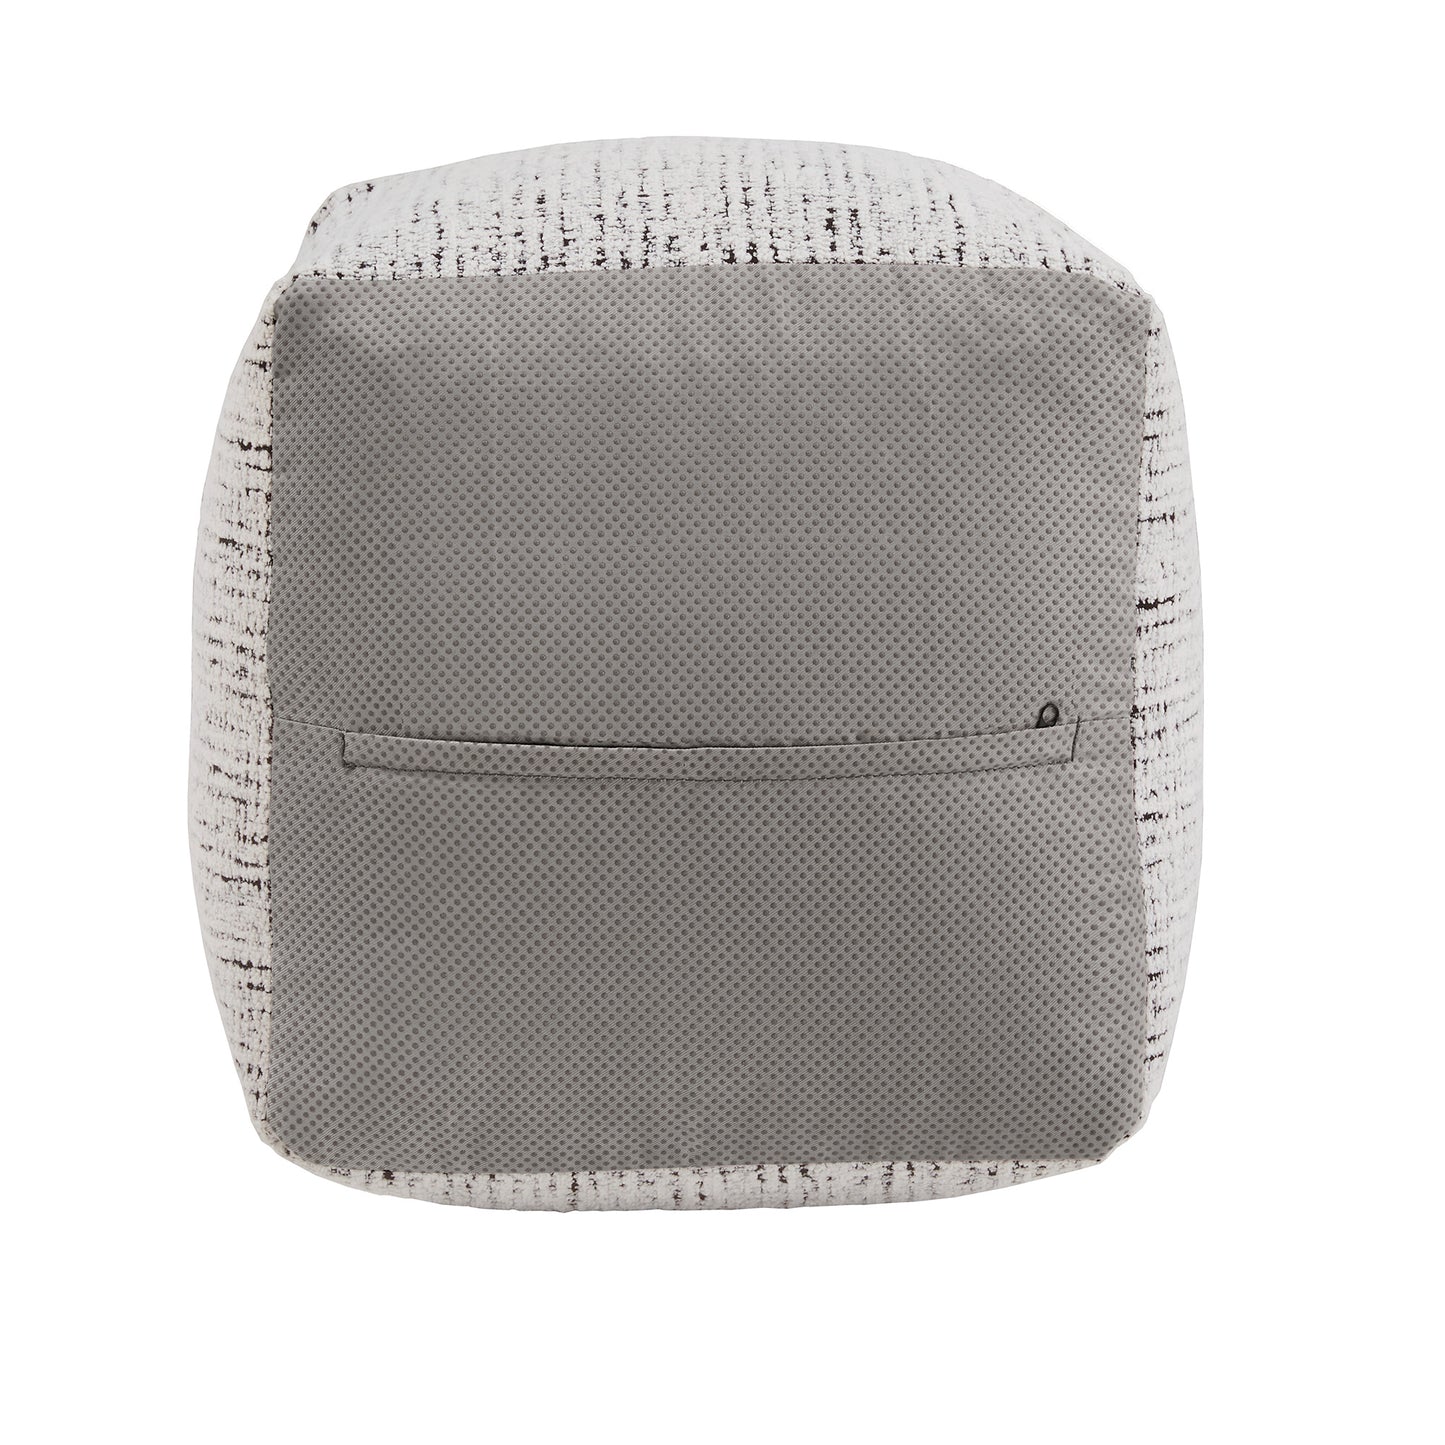 Upholstered Square Pouf Ottoman - Black & White Tweed Chenille